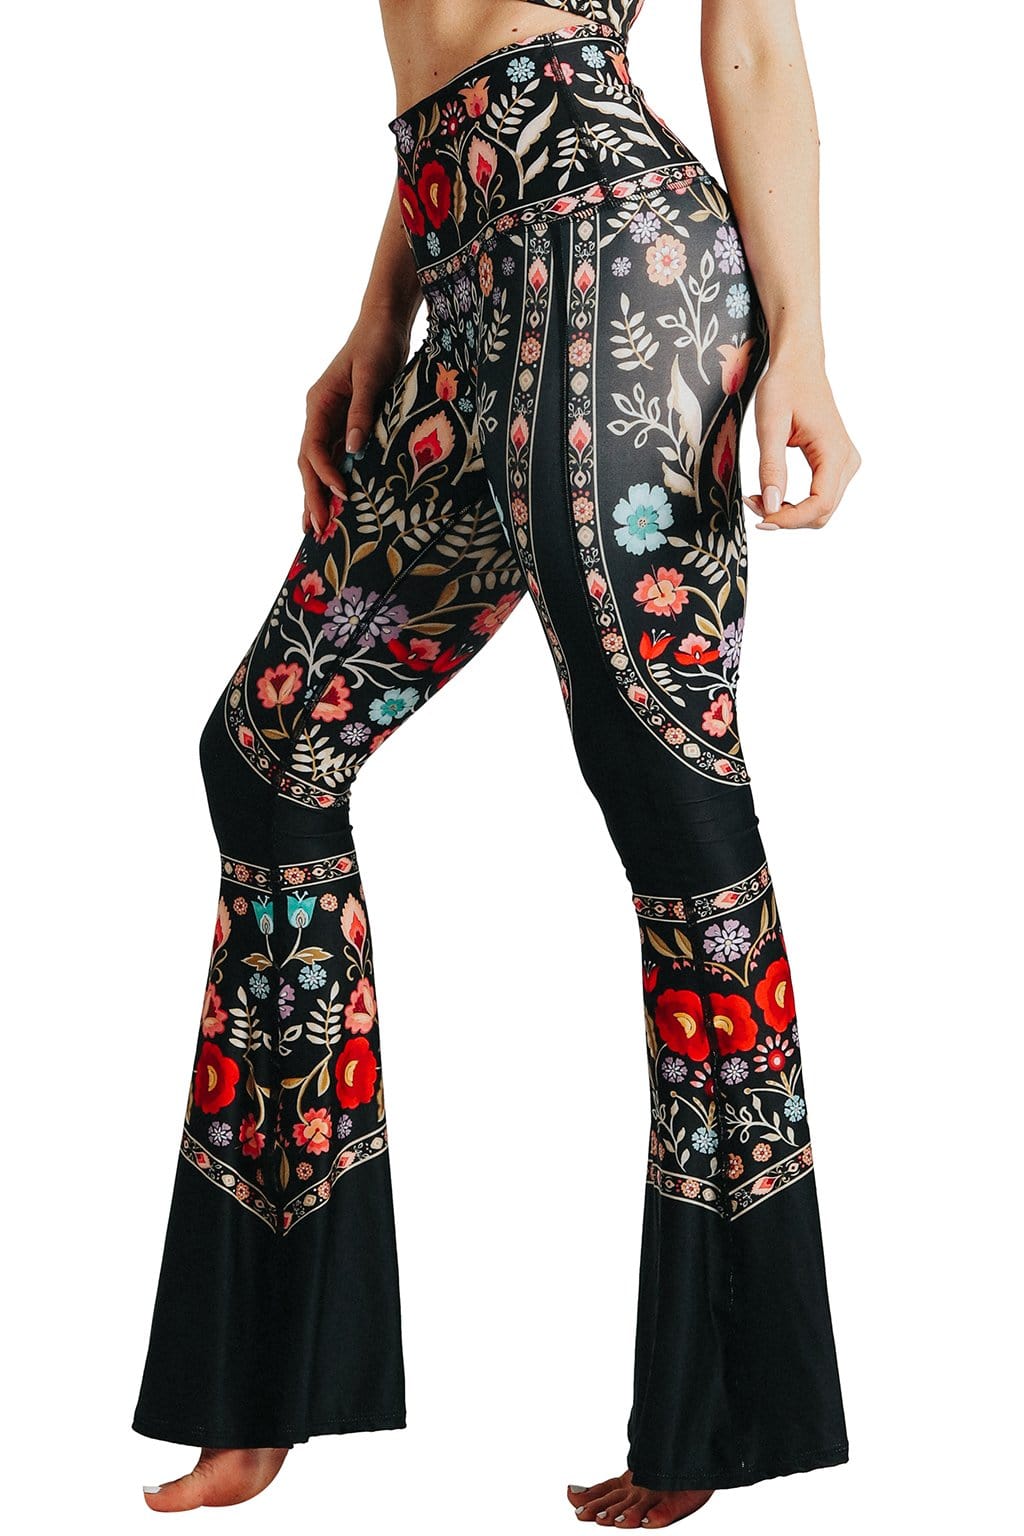 Image of Rustica Printed Bell Bottoms